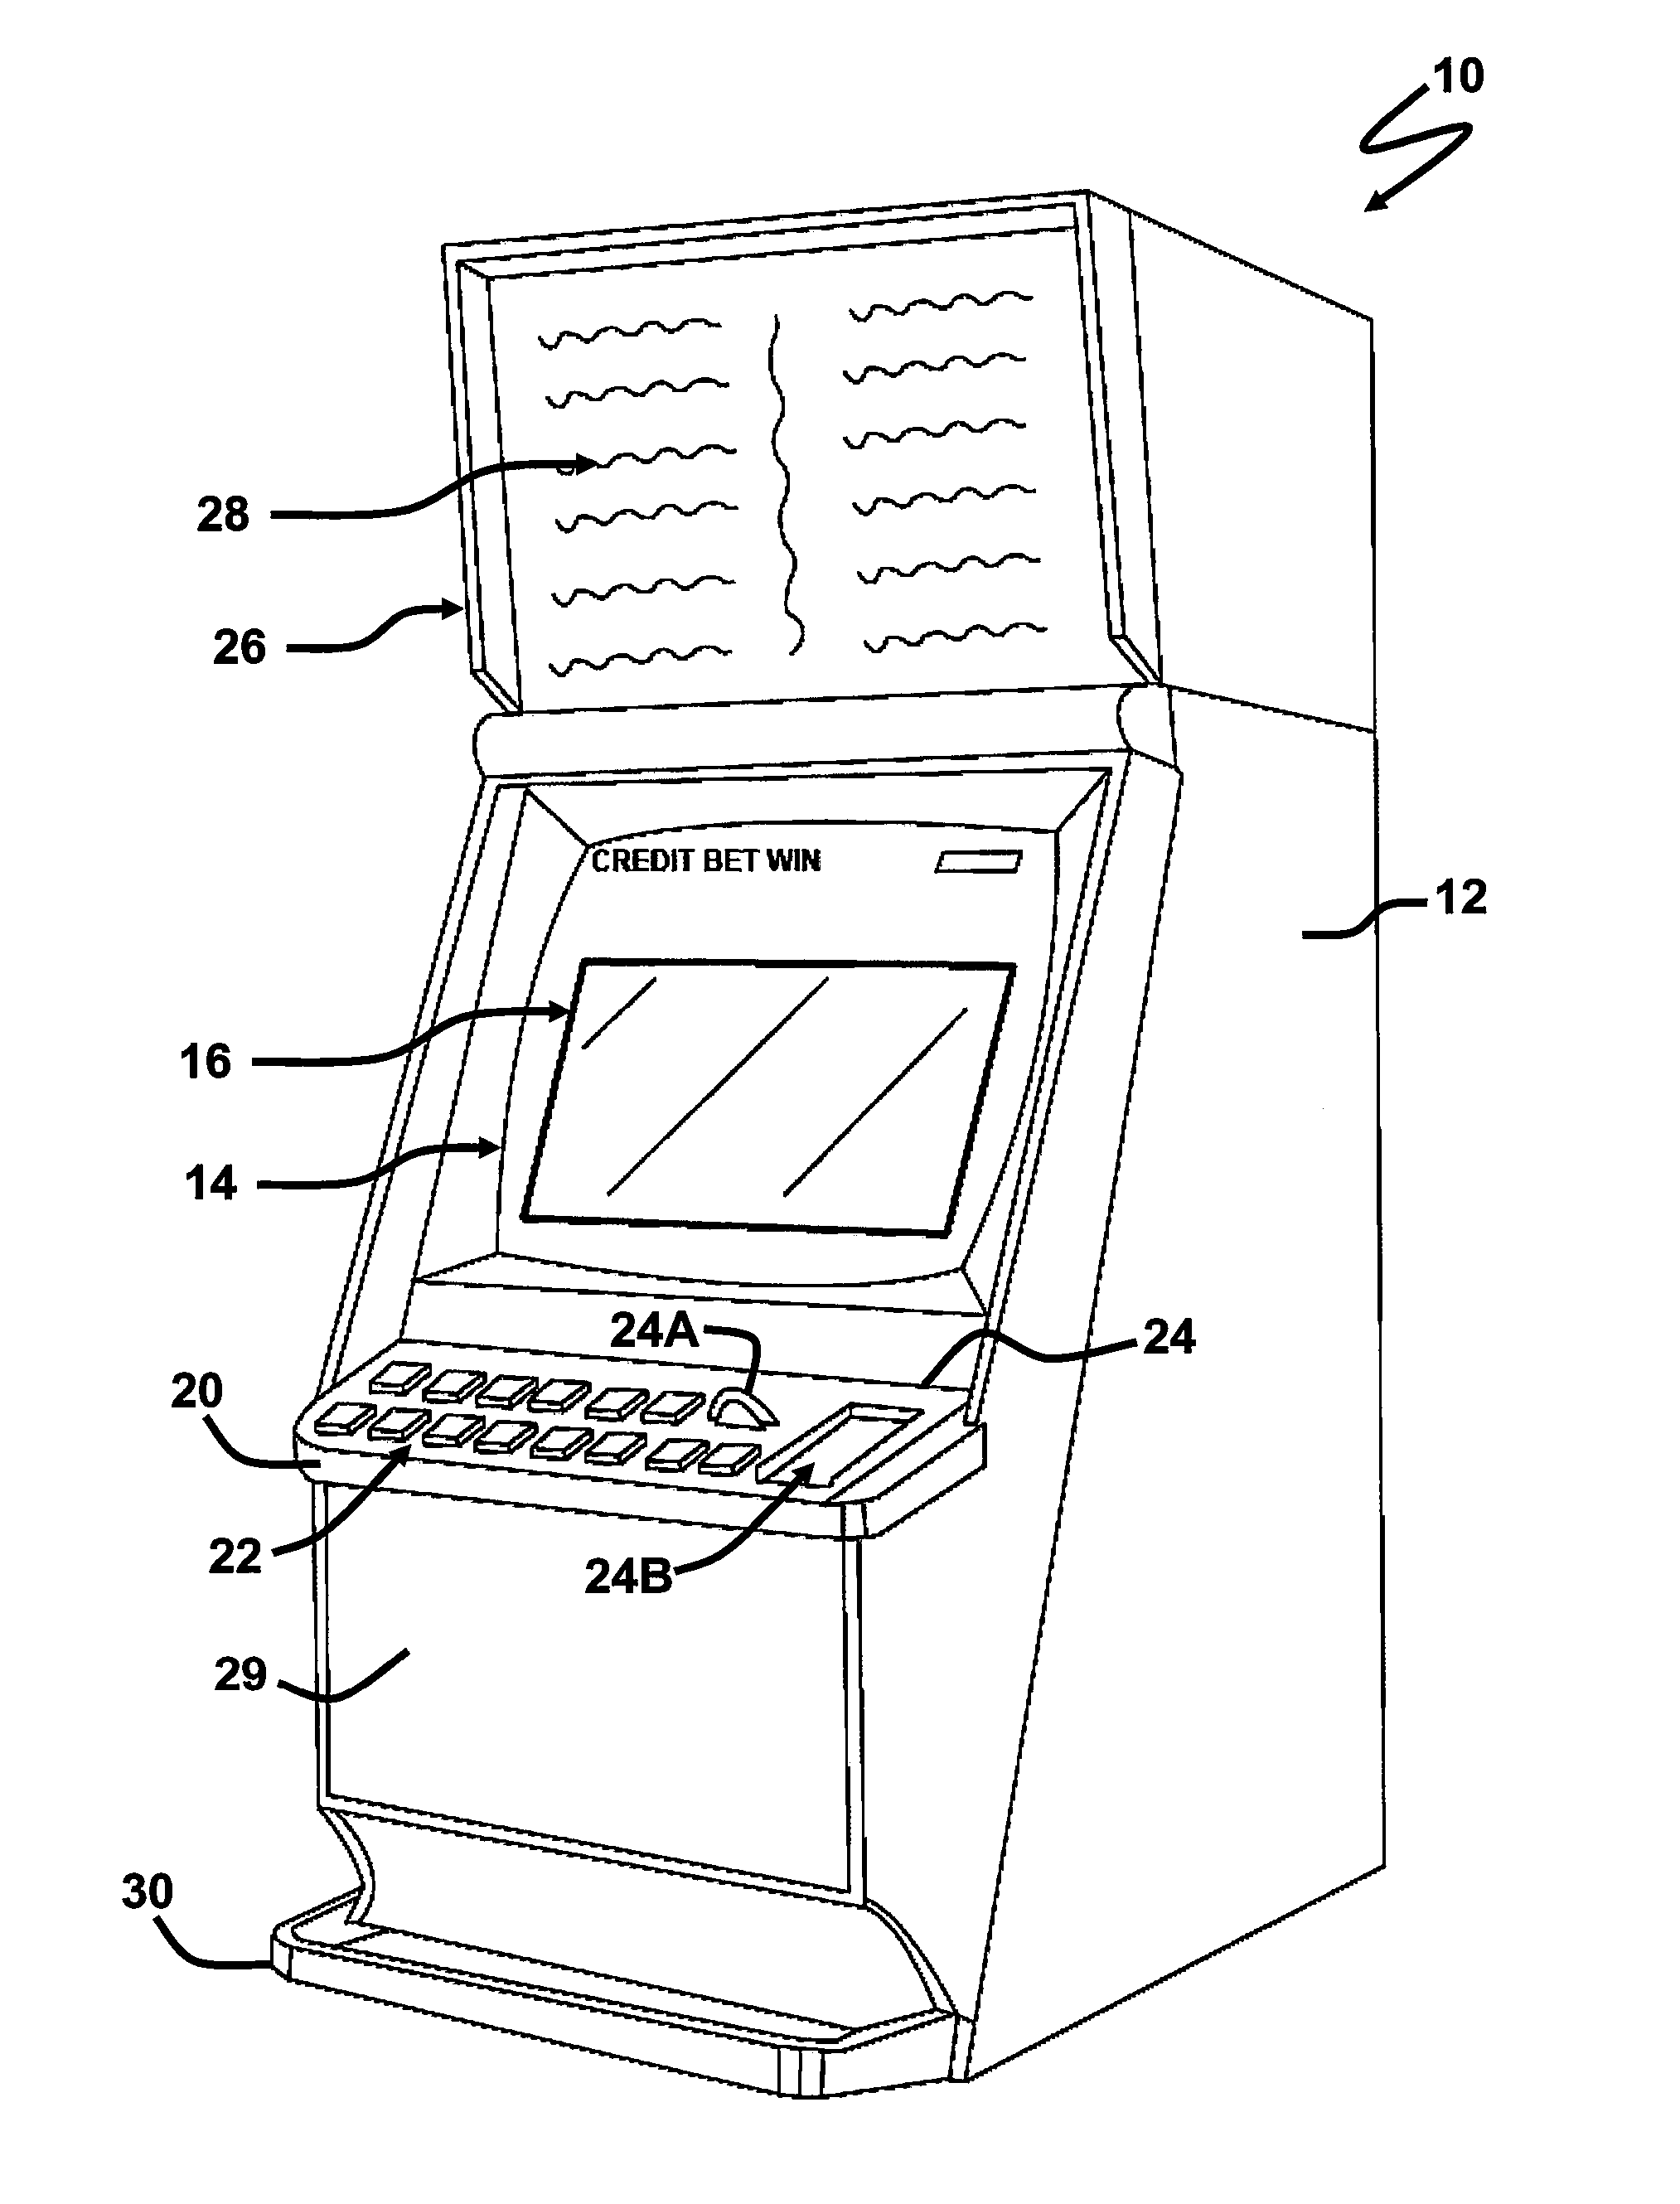 Multiple pay combination gaming apparatus